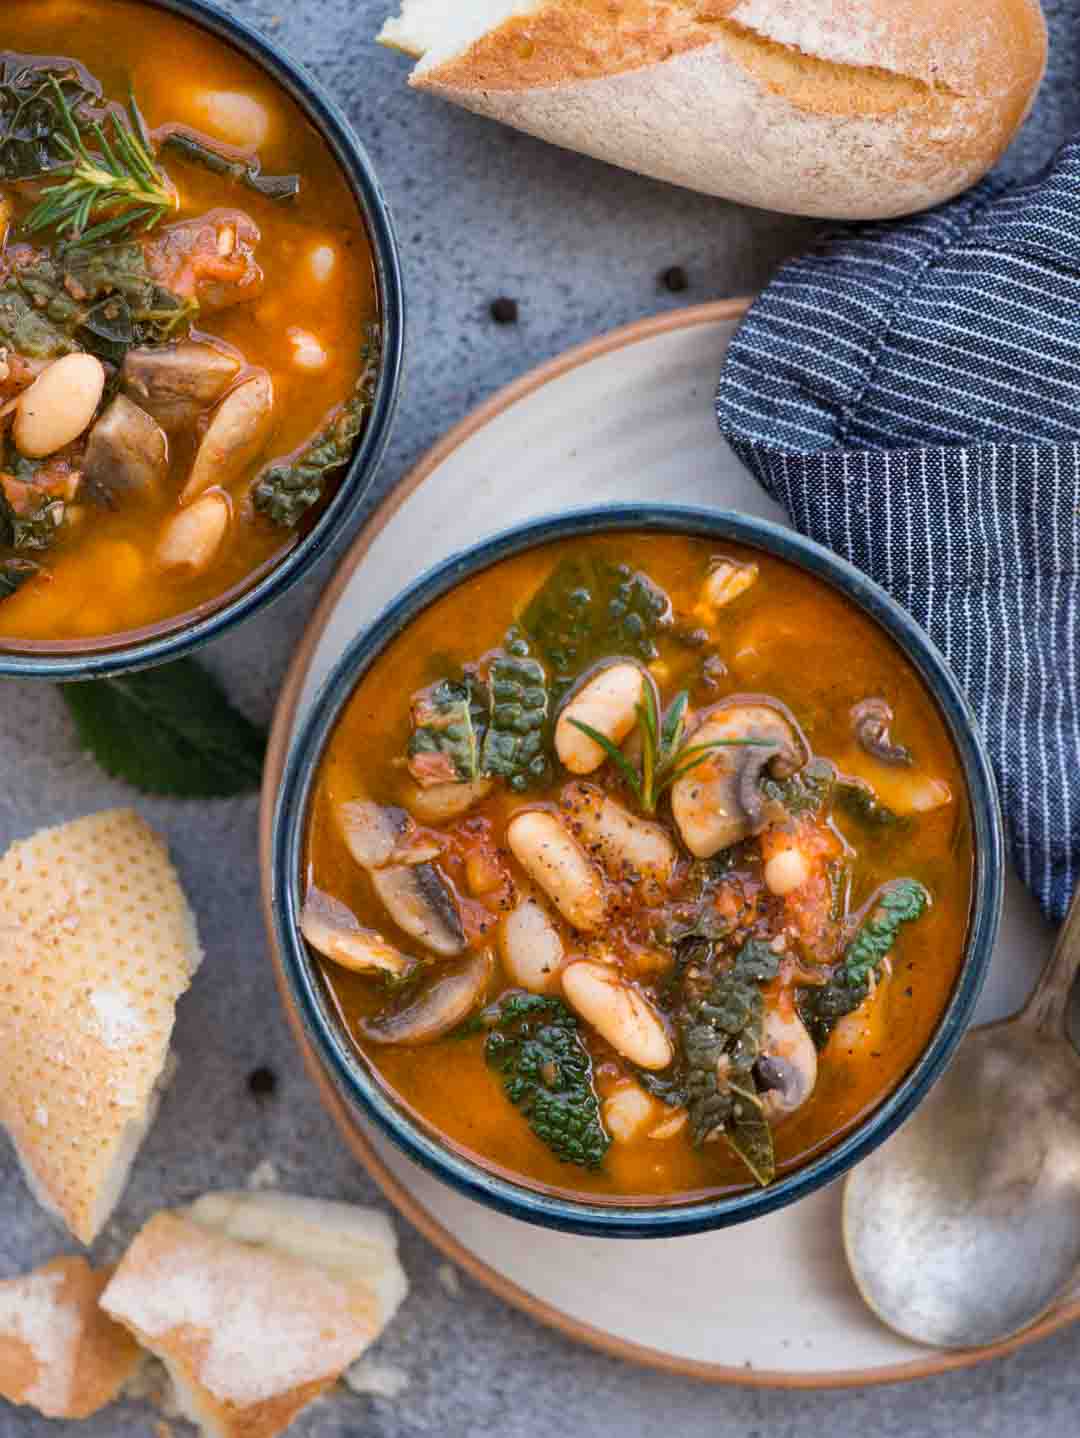 This White Bean Soup with Mushroom and Kale in Tomato based broth is so hearty and delicious. You need only one pot and 20 minutes to make this Soup. Also vegan and gluten-free.